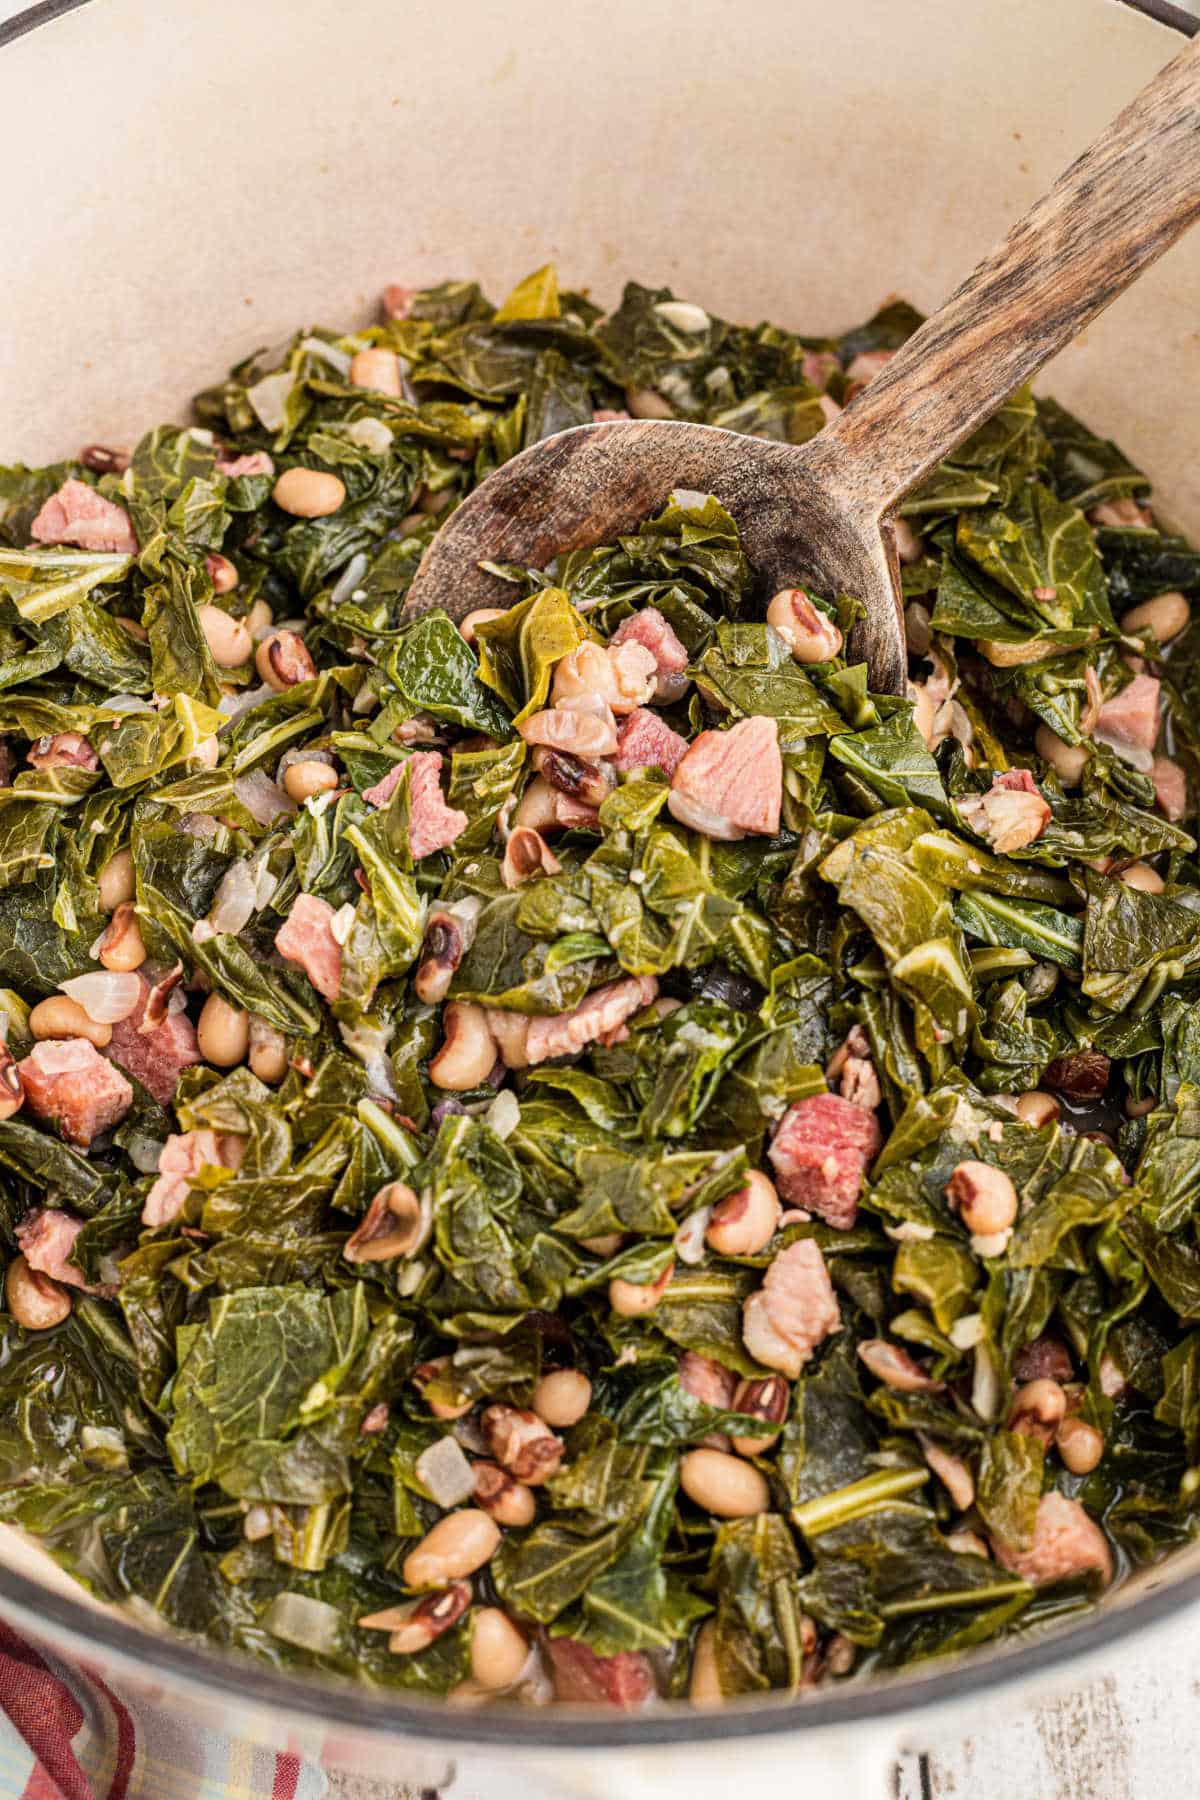 Closeup inside a pot with a spoon digging into the collard greens and black eyed peas.